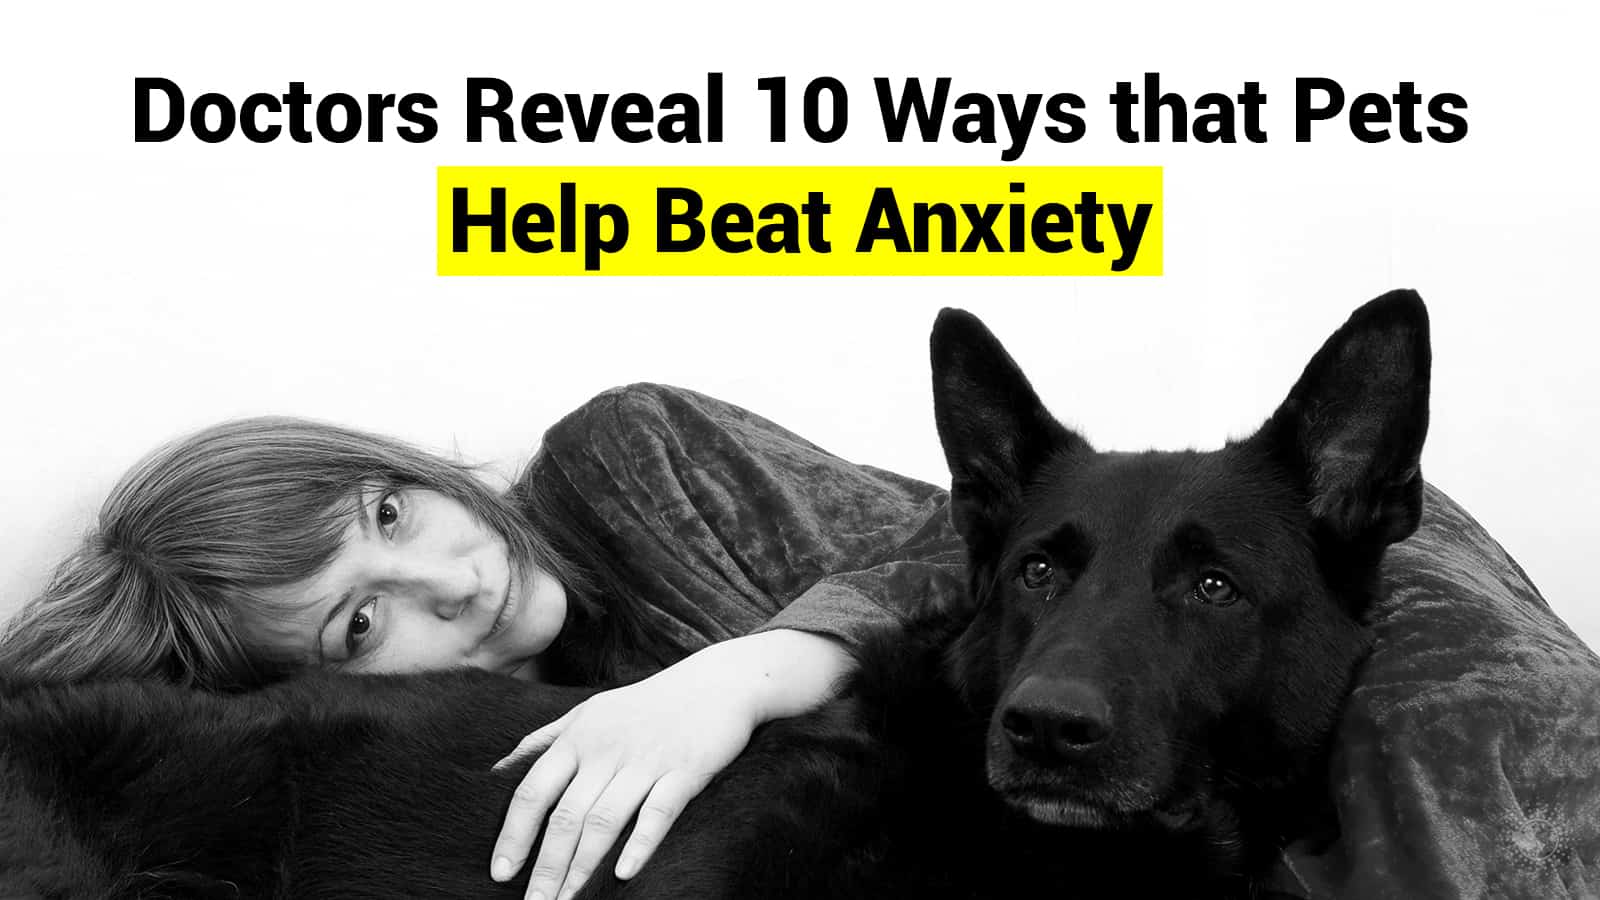 Doctors Reveal 10 Ways that Pets Help Beat Anxiety